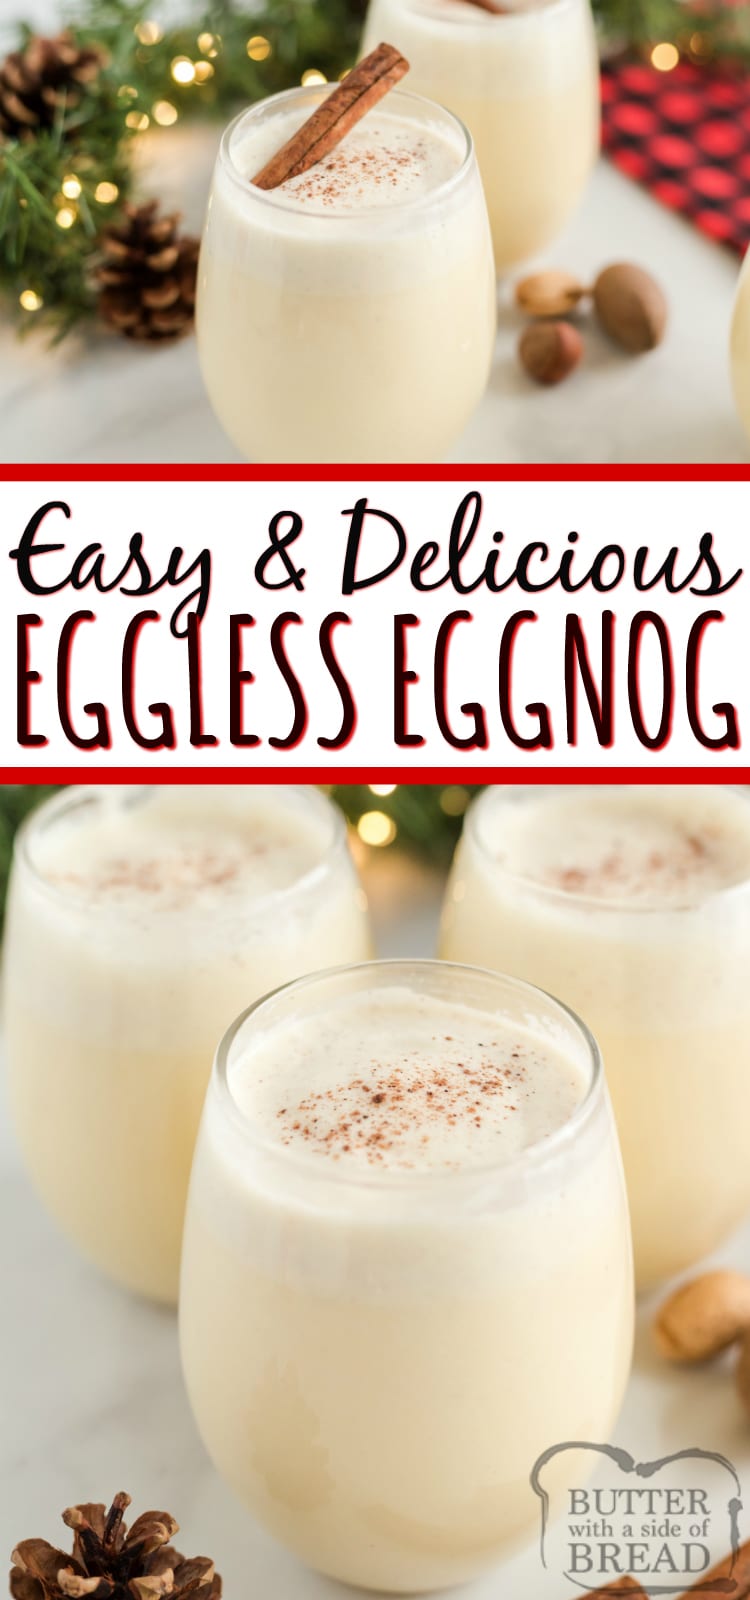 Easy Eggless Eggnog recipe can be made quickly in a blender with French vanilla pudding, milk, whipped cream and a few other basic ingredients! This homemade eggnog recipe tastes just like your favorite holiday drink, no eggs necessary!